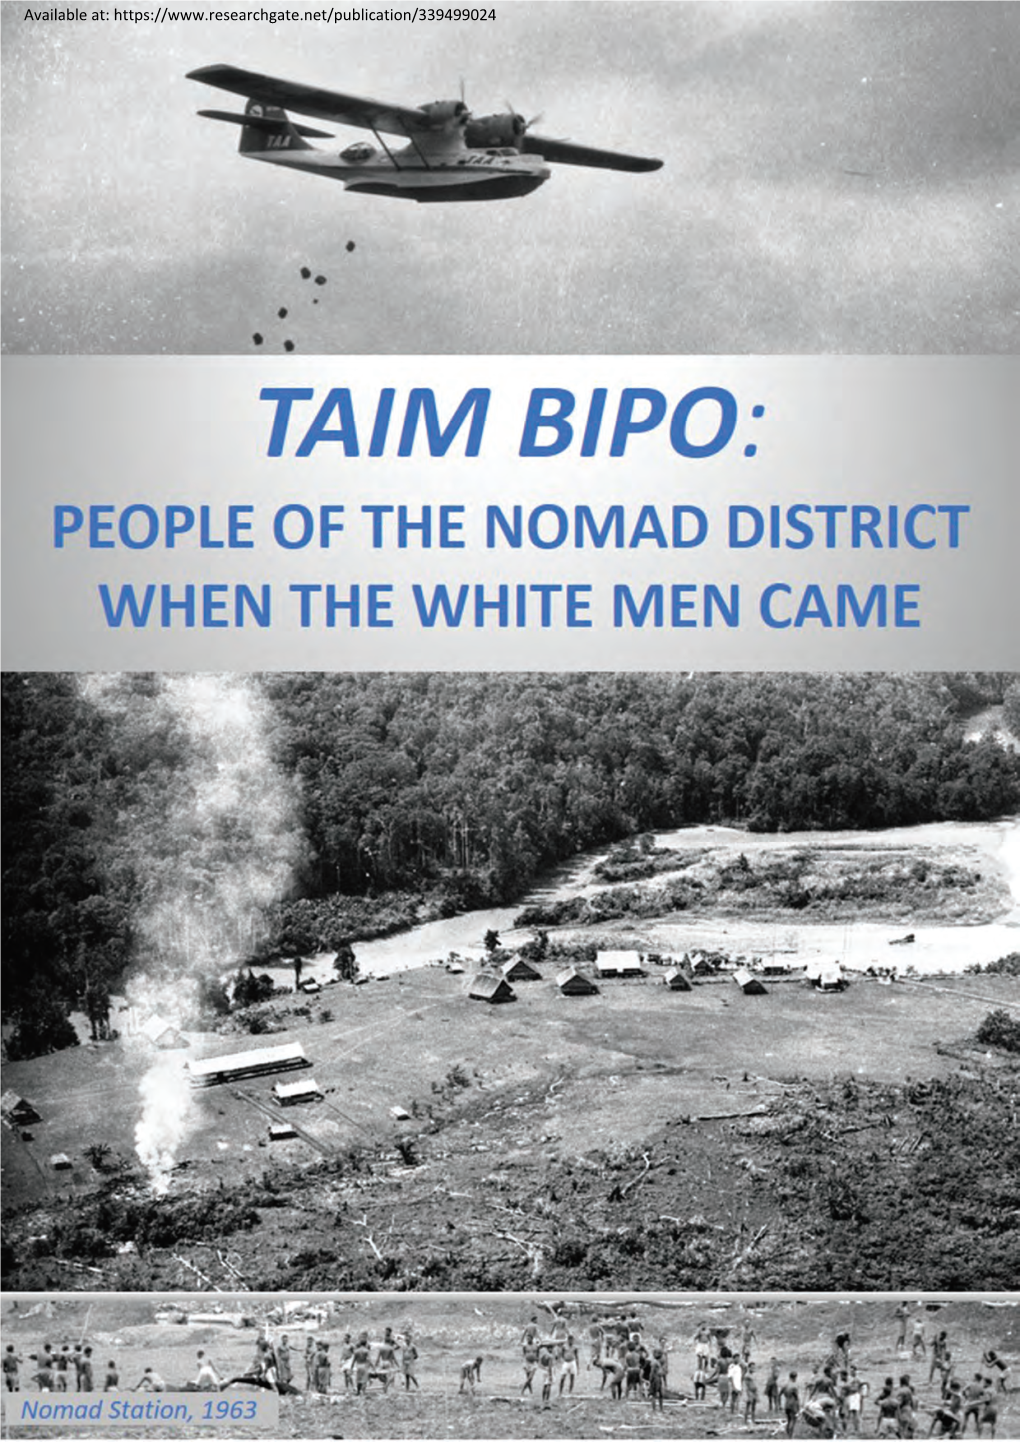 Taim Bipo: People of the Nomad District When the White Men Came